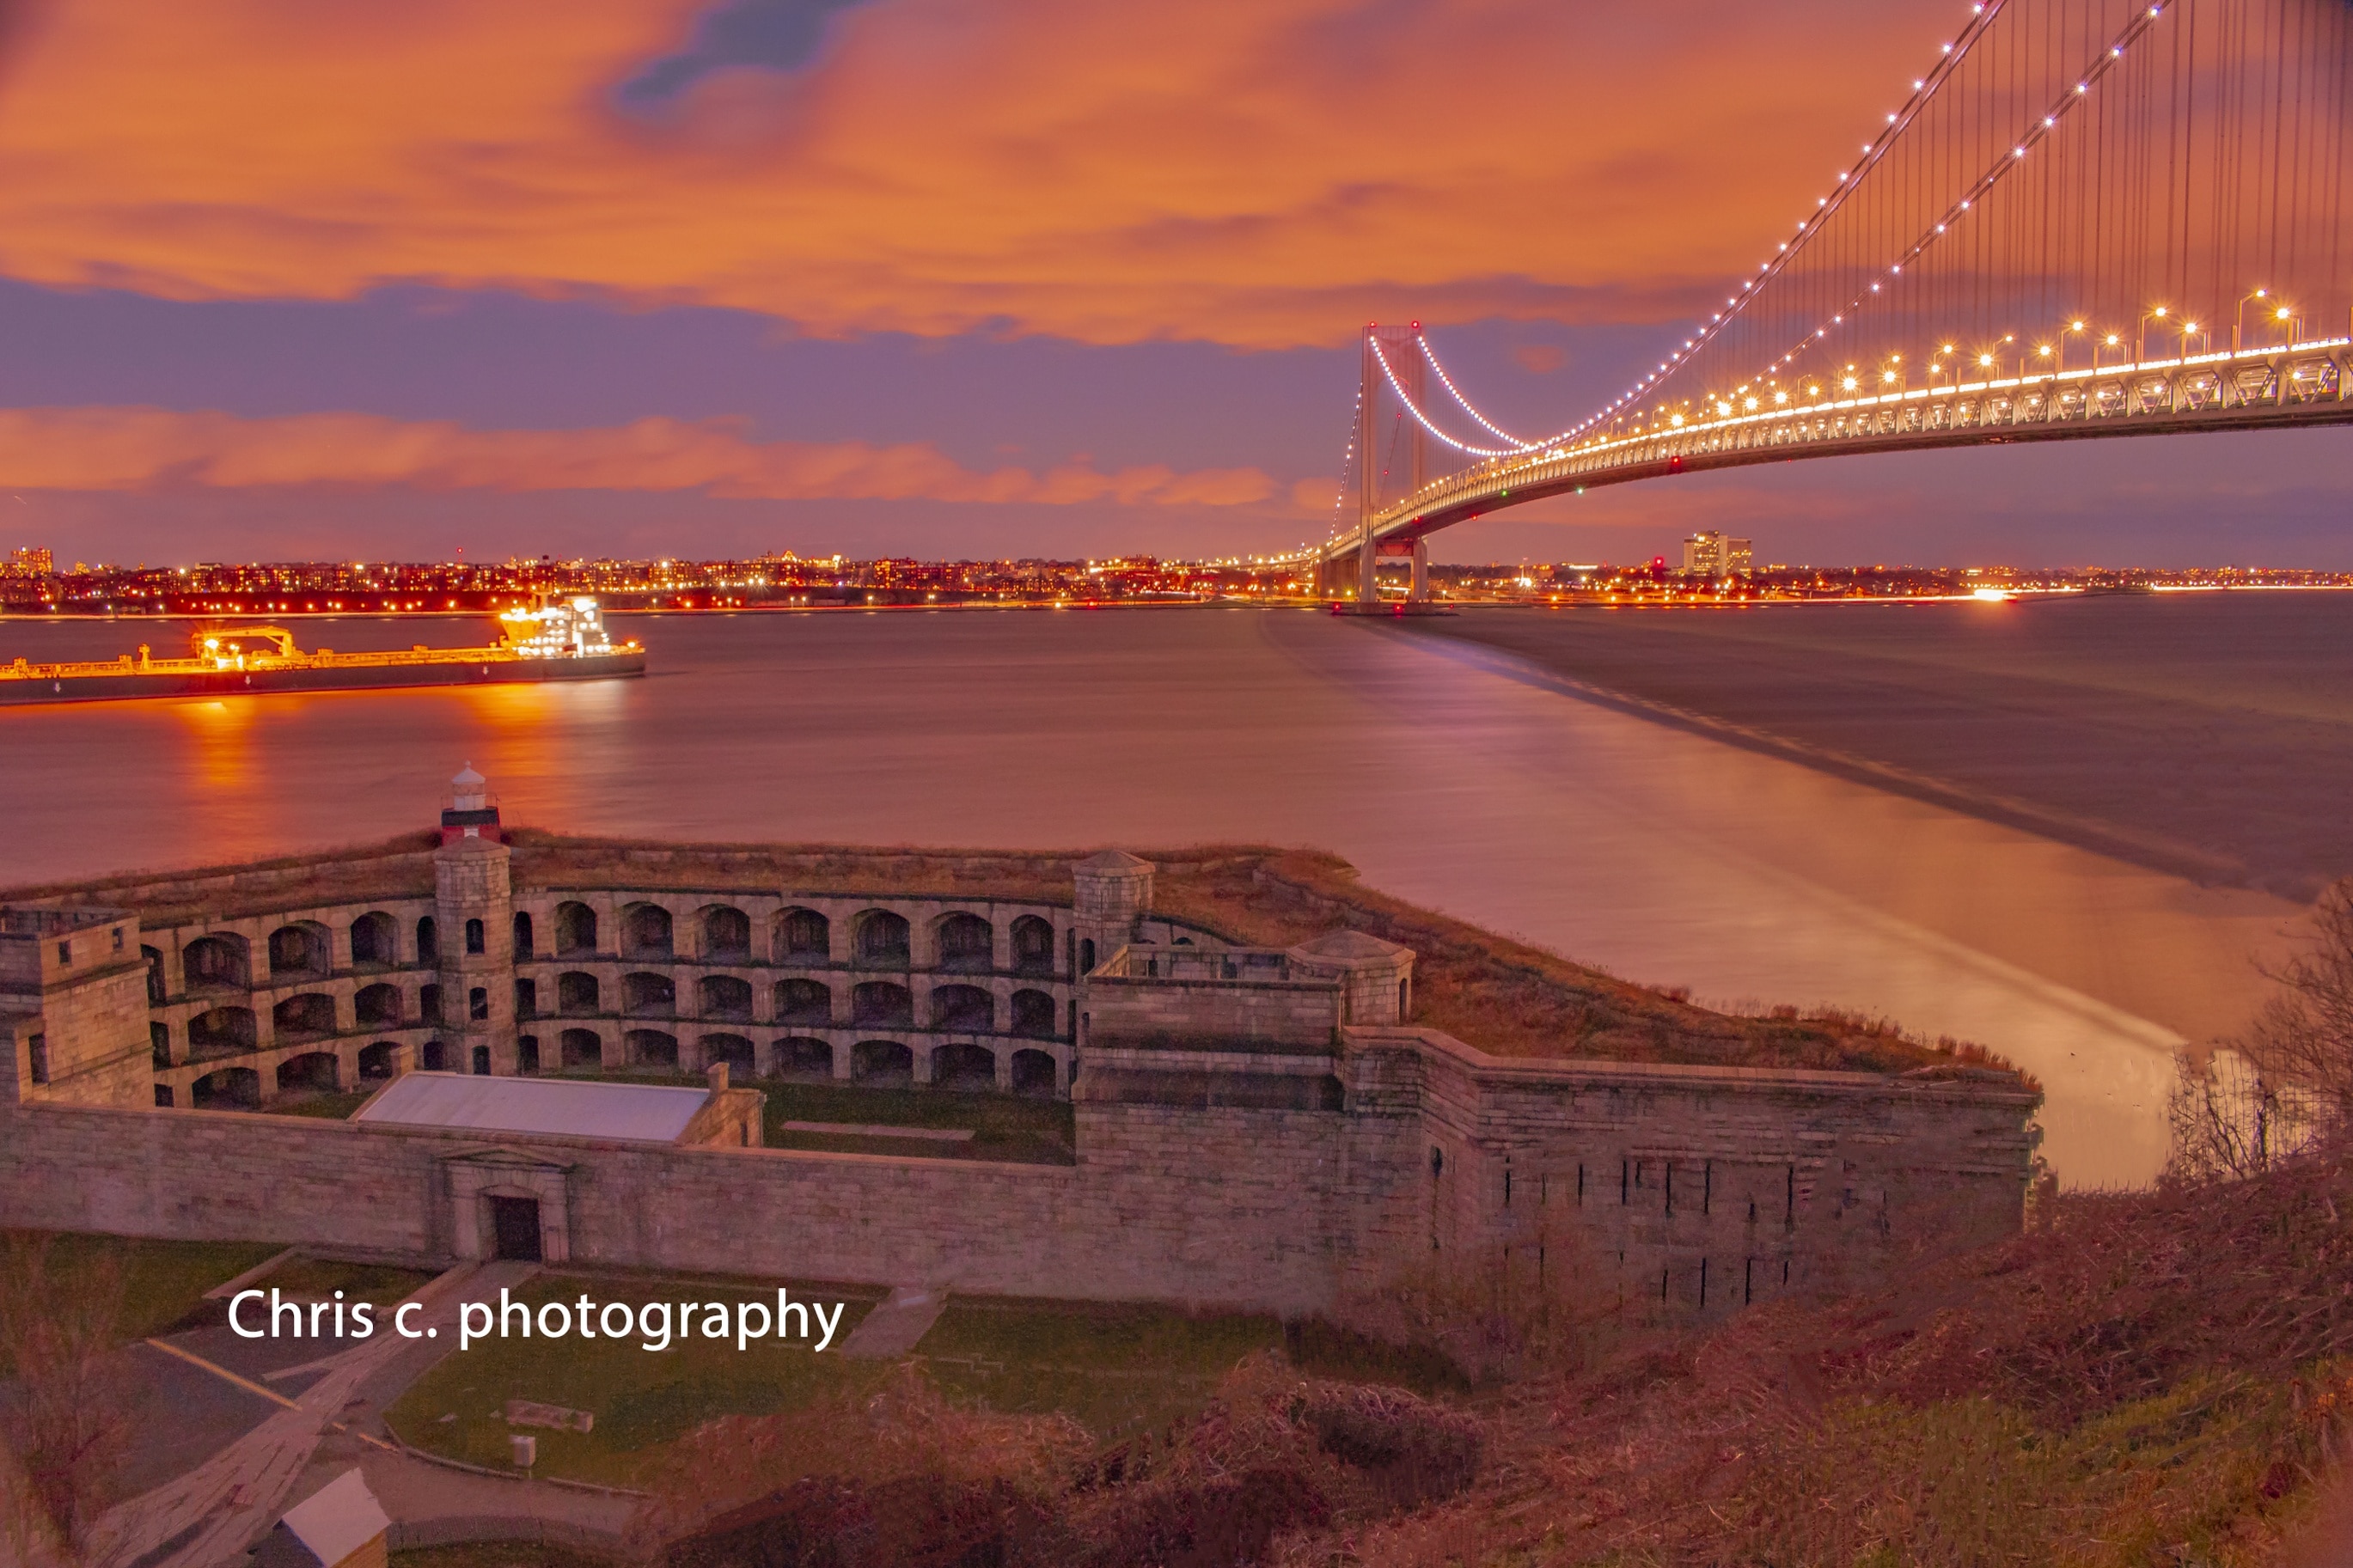 this is my 2nd shot from fort wadsworth. this time with both the fort and the bridge in the shot. this is a great site to see at night or sunset. the veiws are amazing.